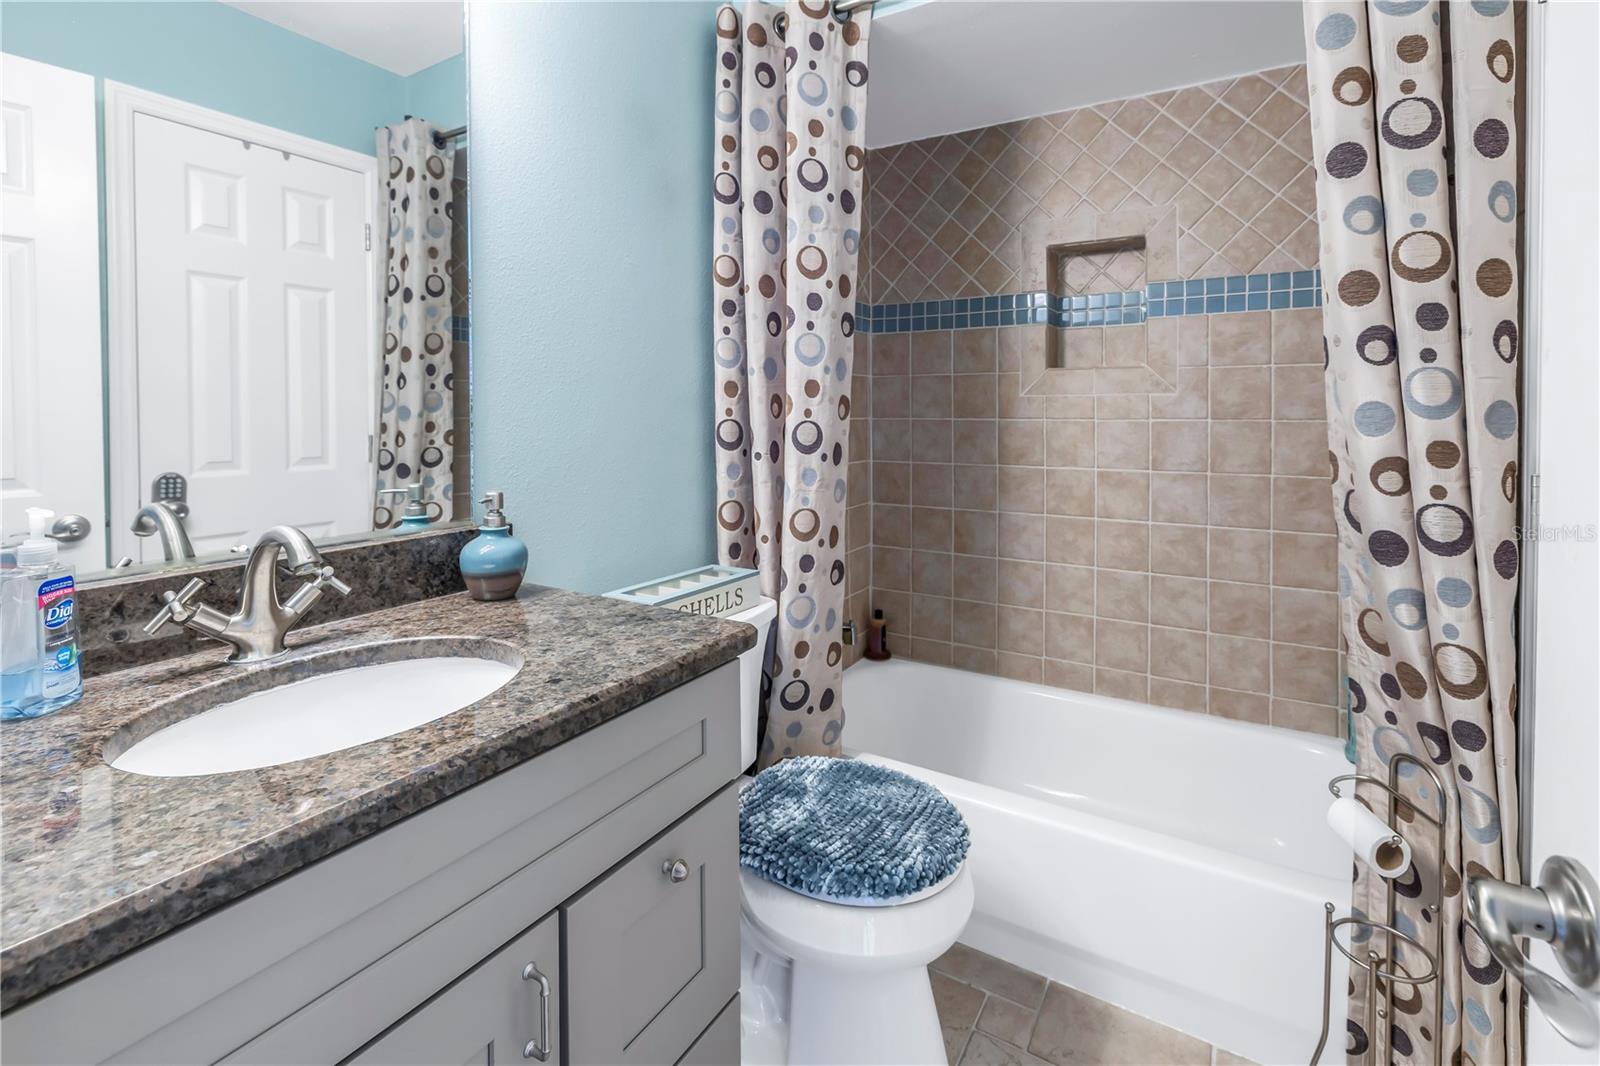 Second bathroom with updated vanity, granite counter and tile